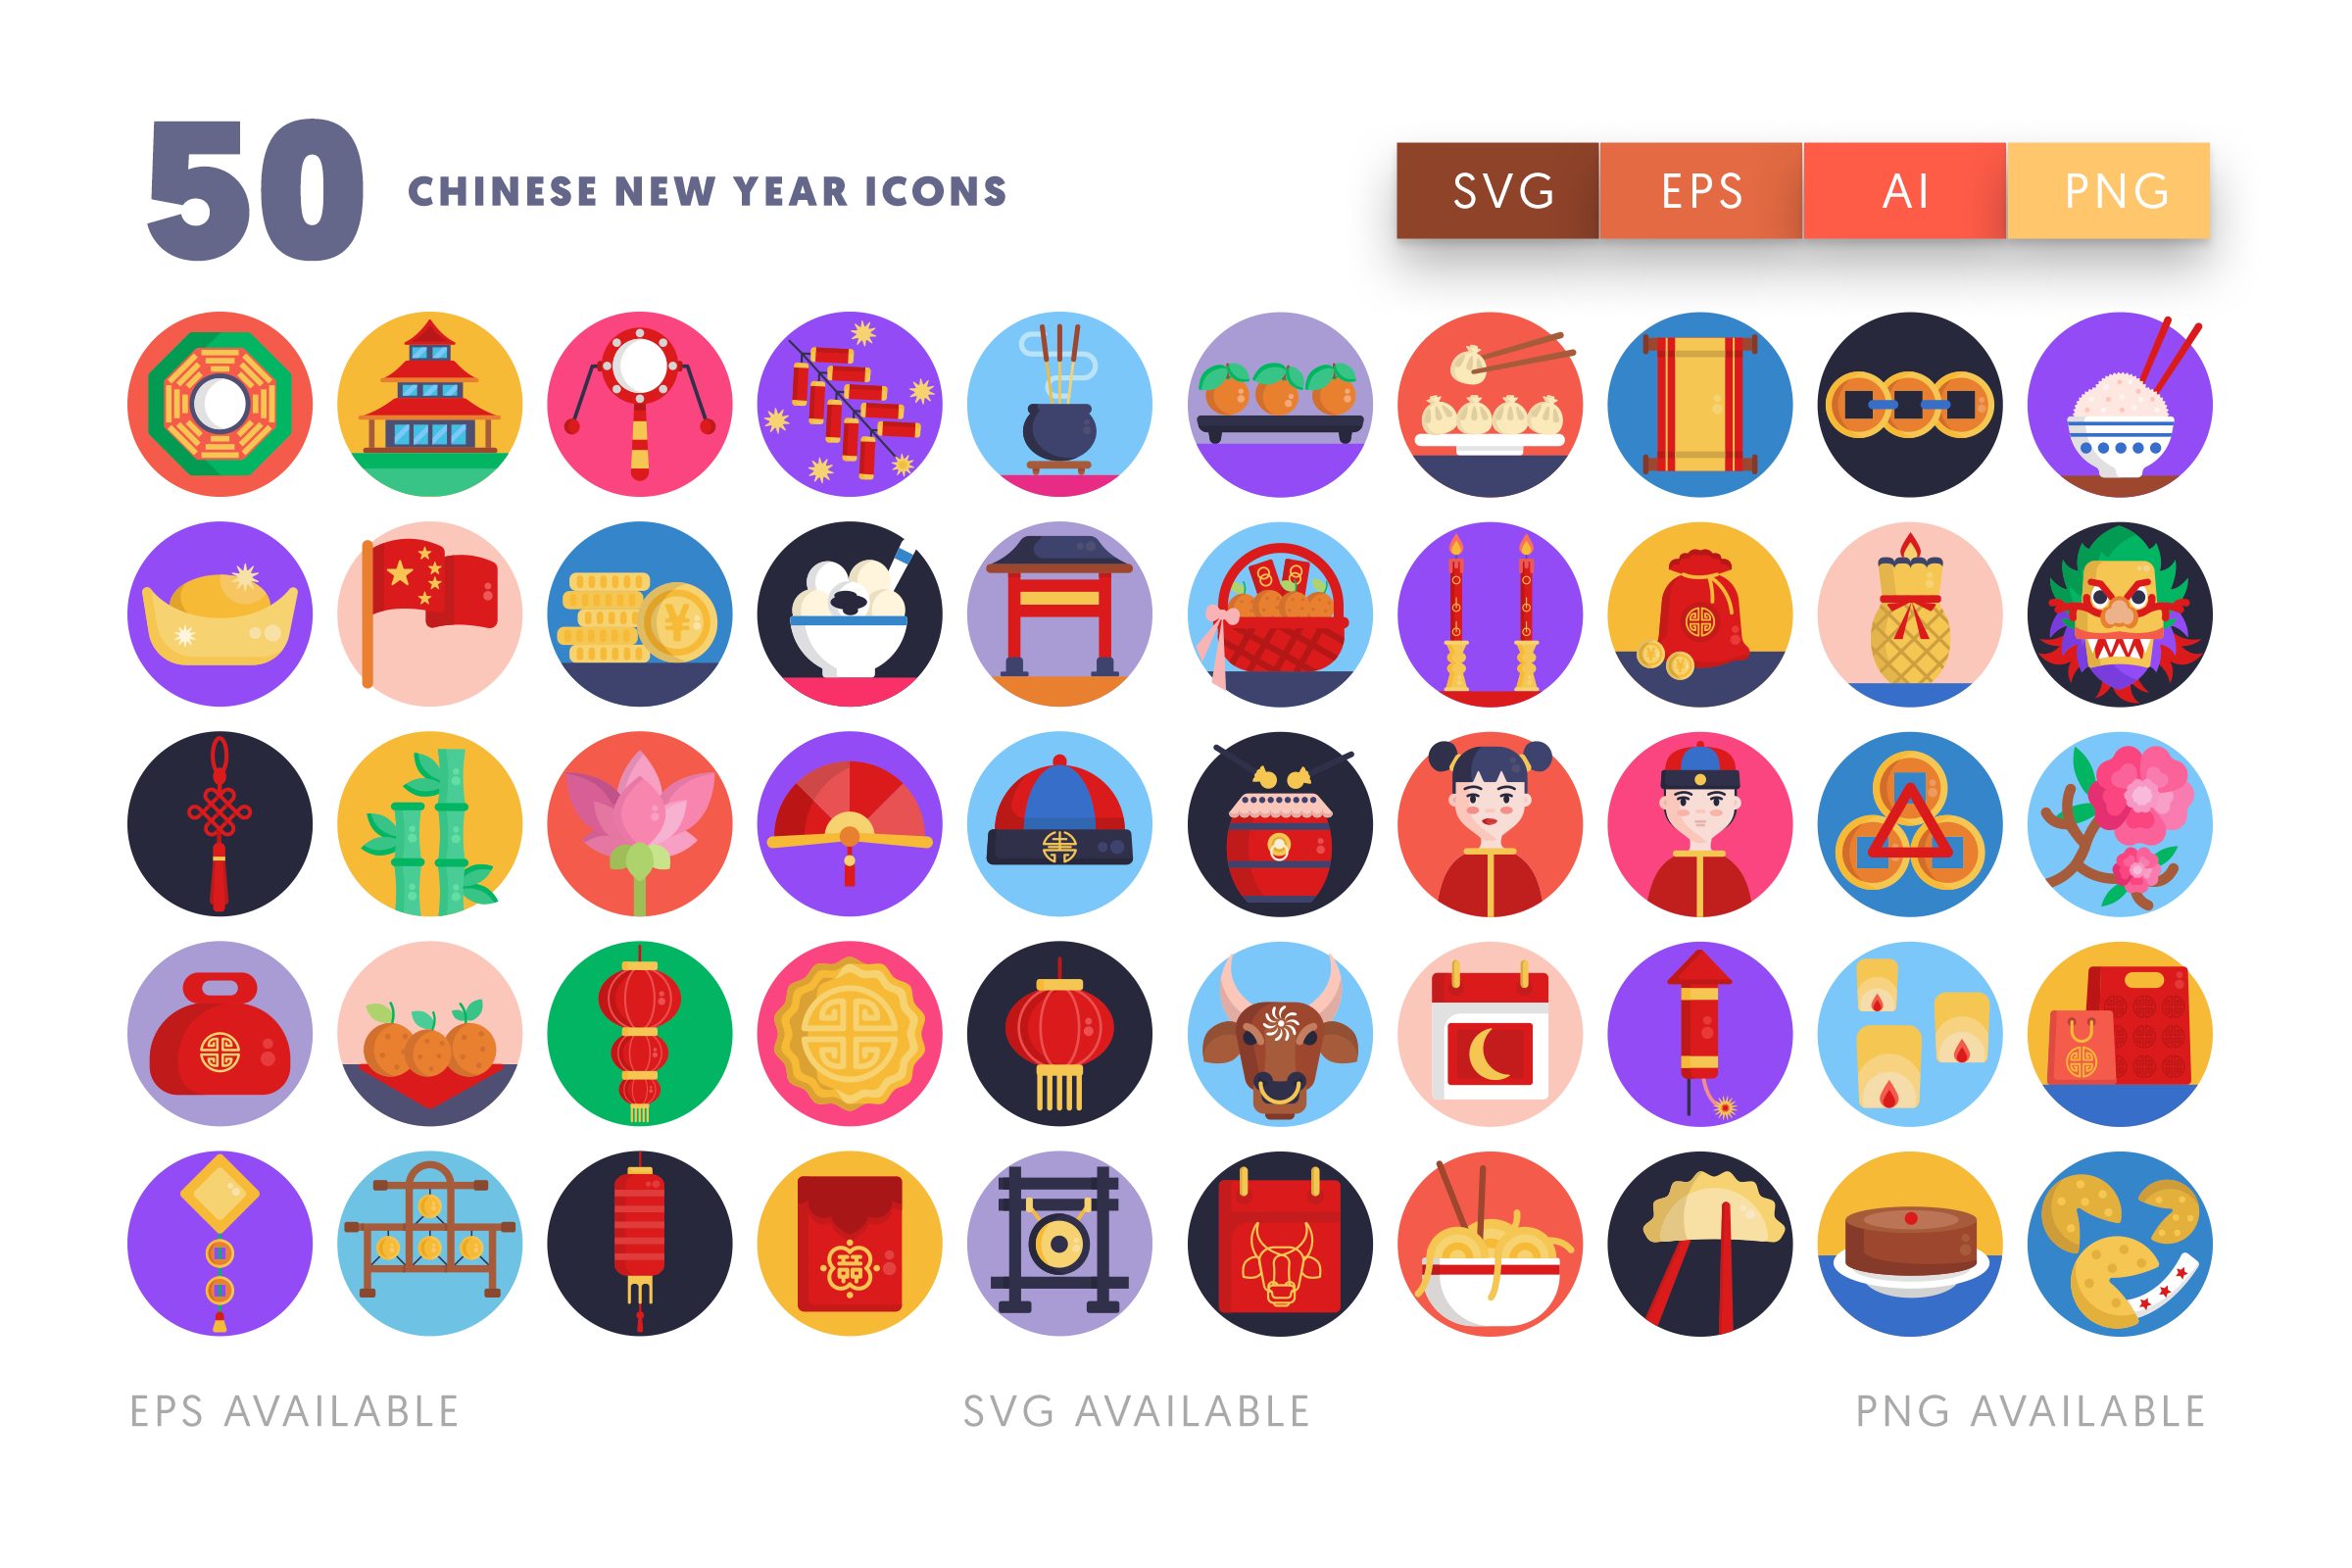 Chinese New Year icons png/svg/eps